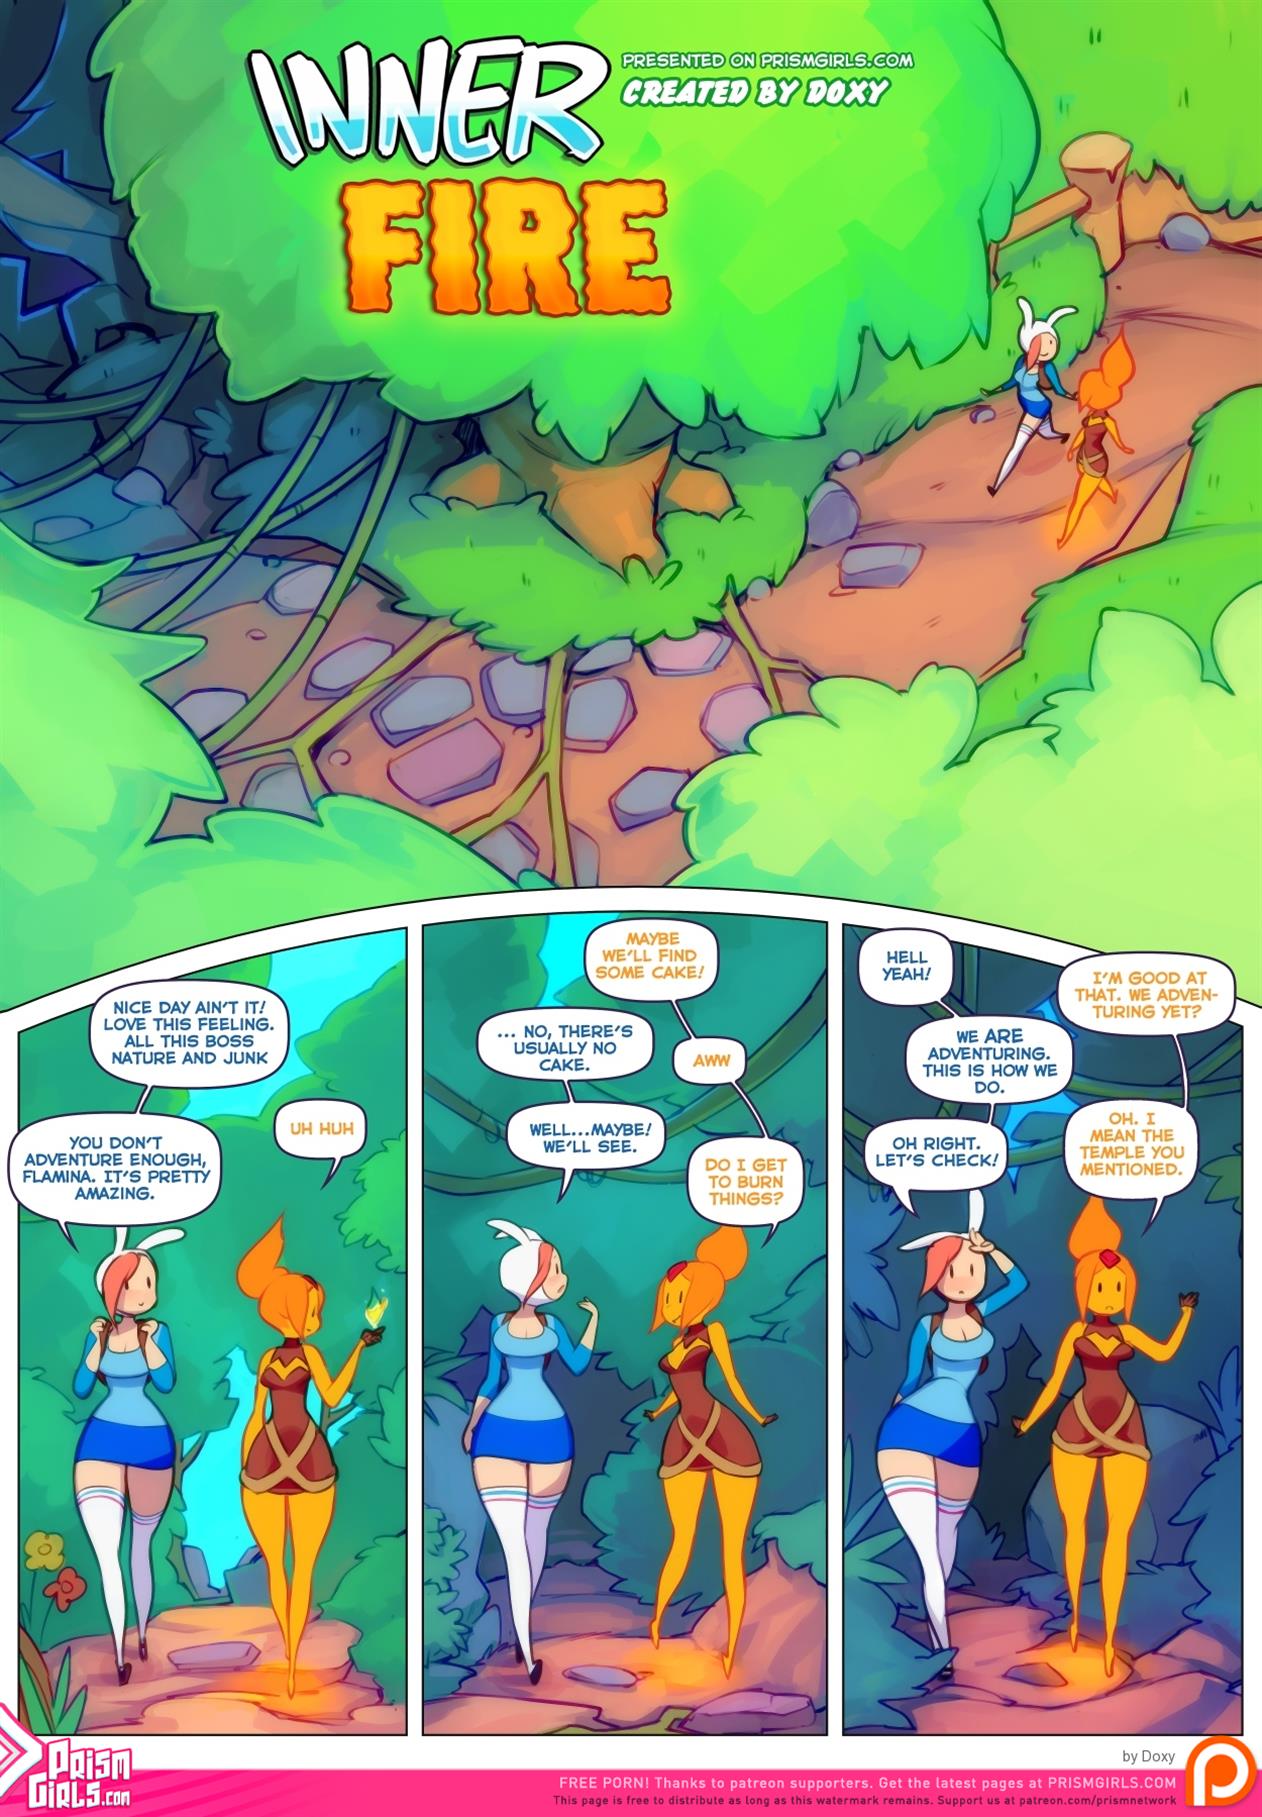 Inner Fire (Adventure Time) [Prism Girls]